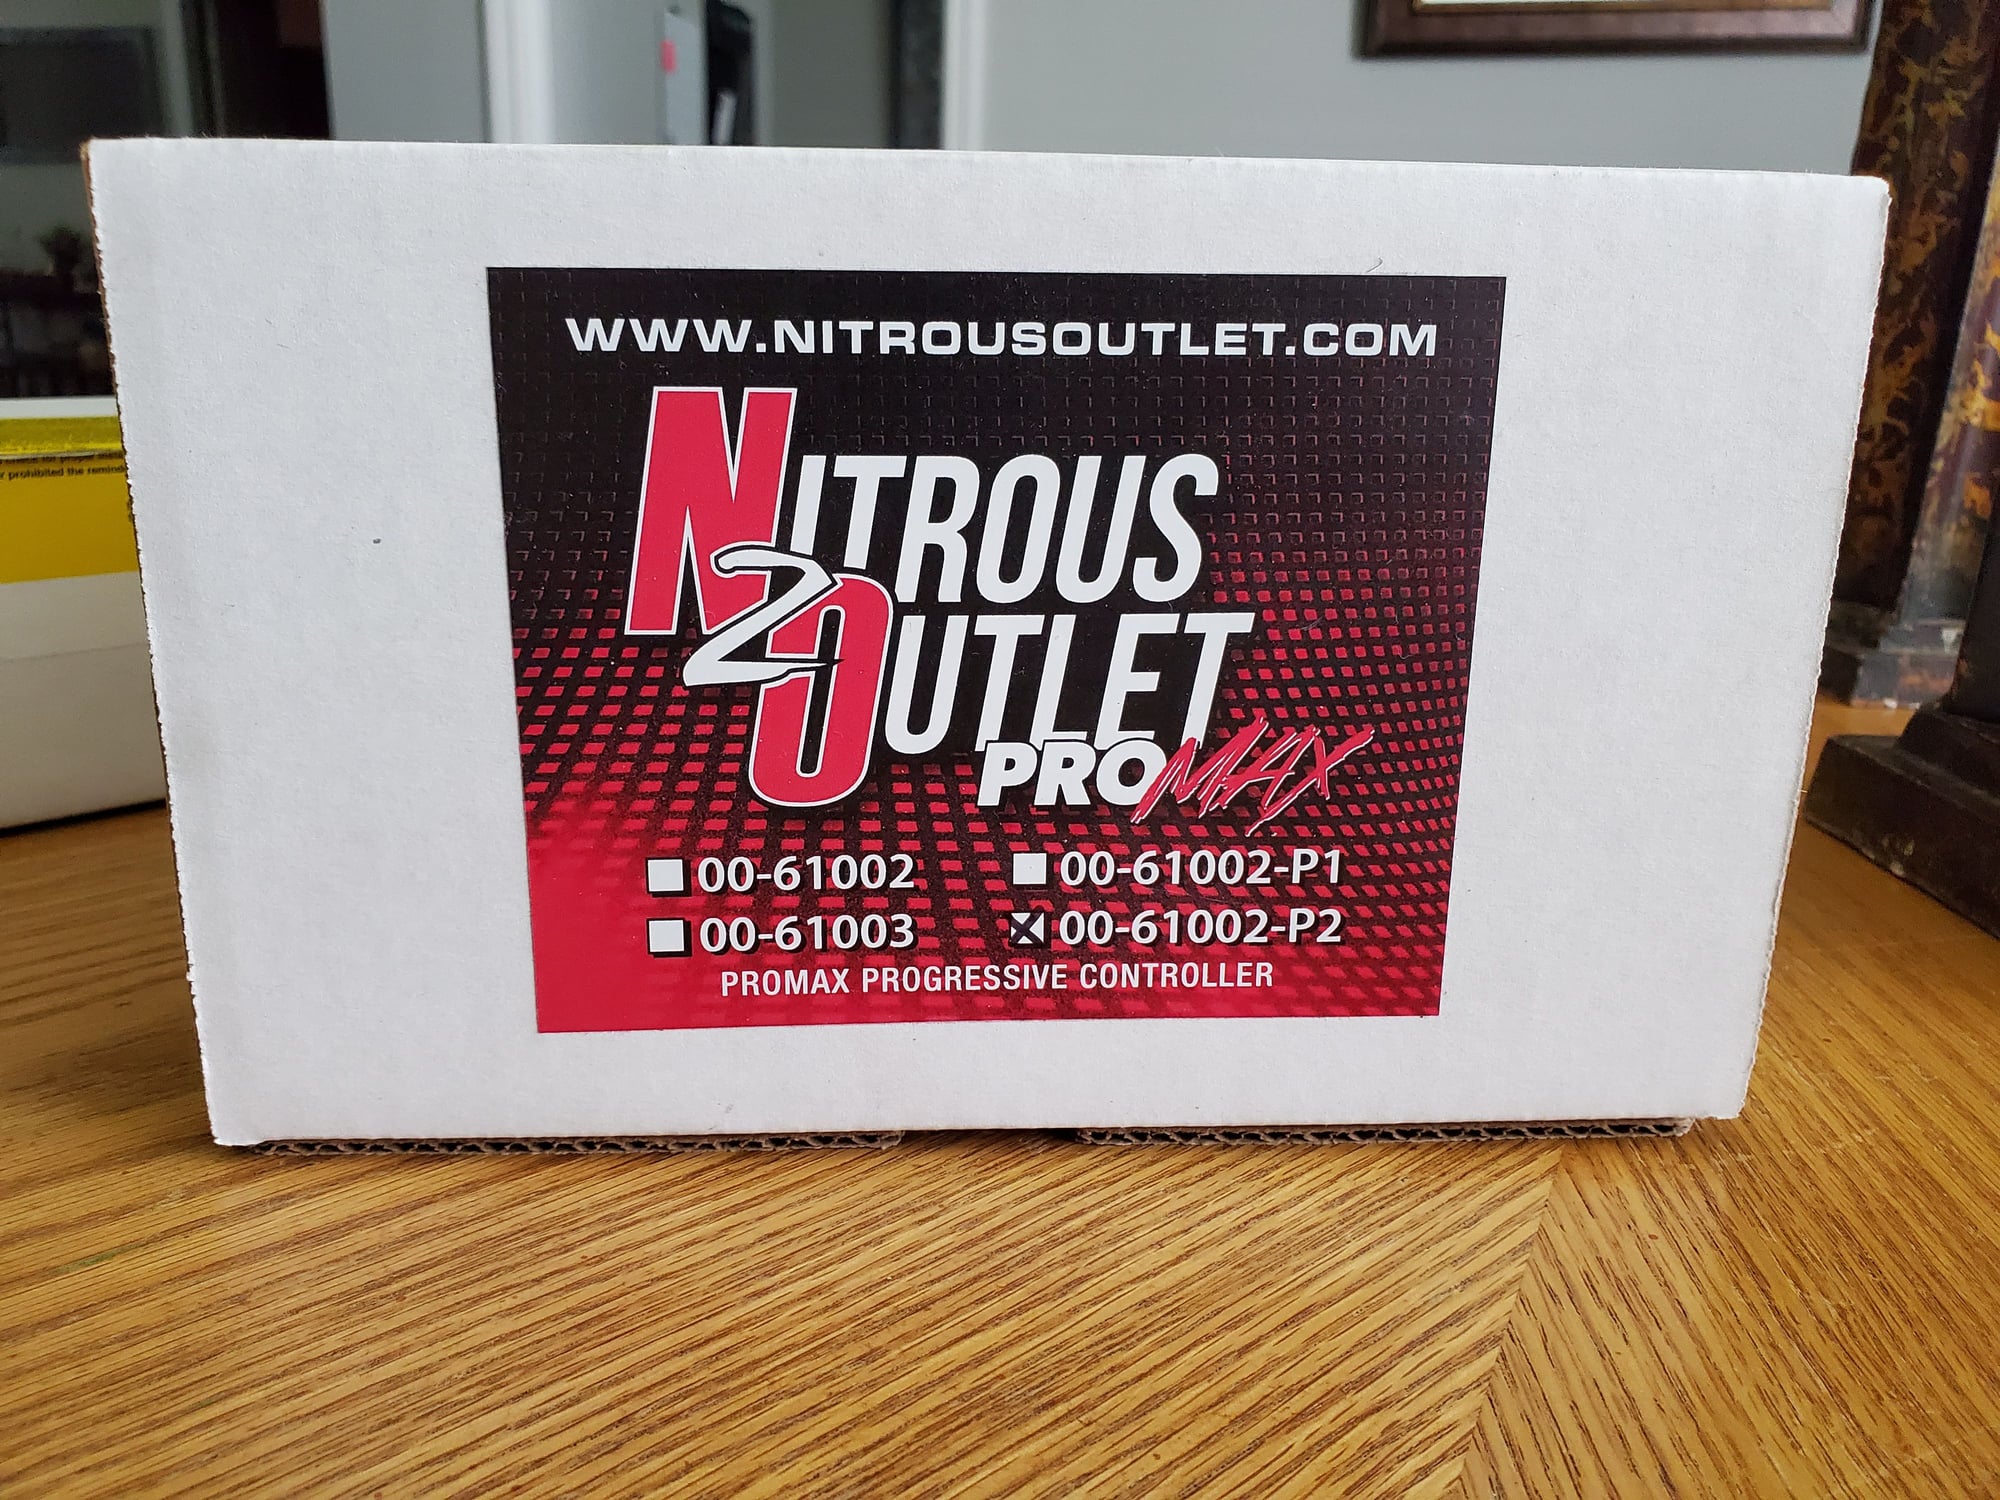 Engine - Intake/Fuel - Nitrous Outlet Promax Kit (00-61002-P2) *BNIB* - New - All Years Any Make All Models - Meridianville, AL 35759, United States